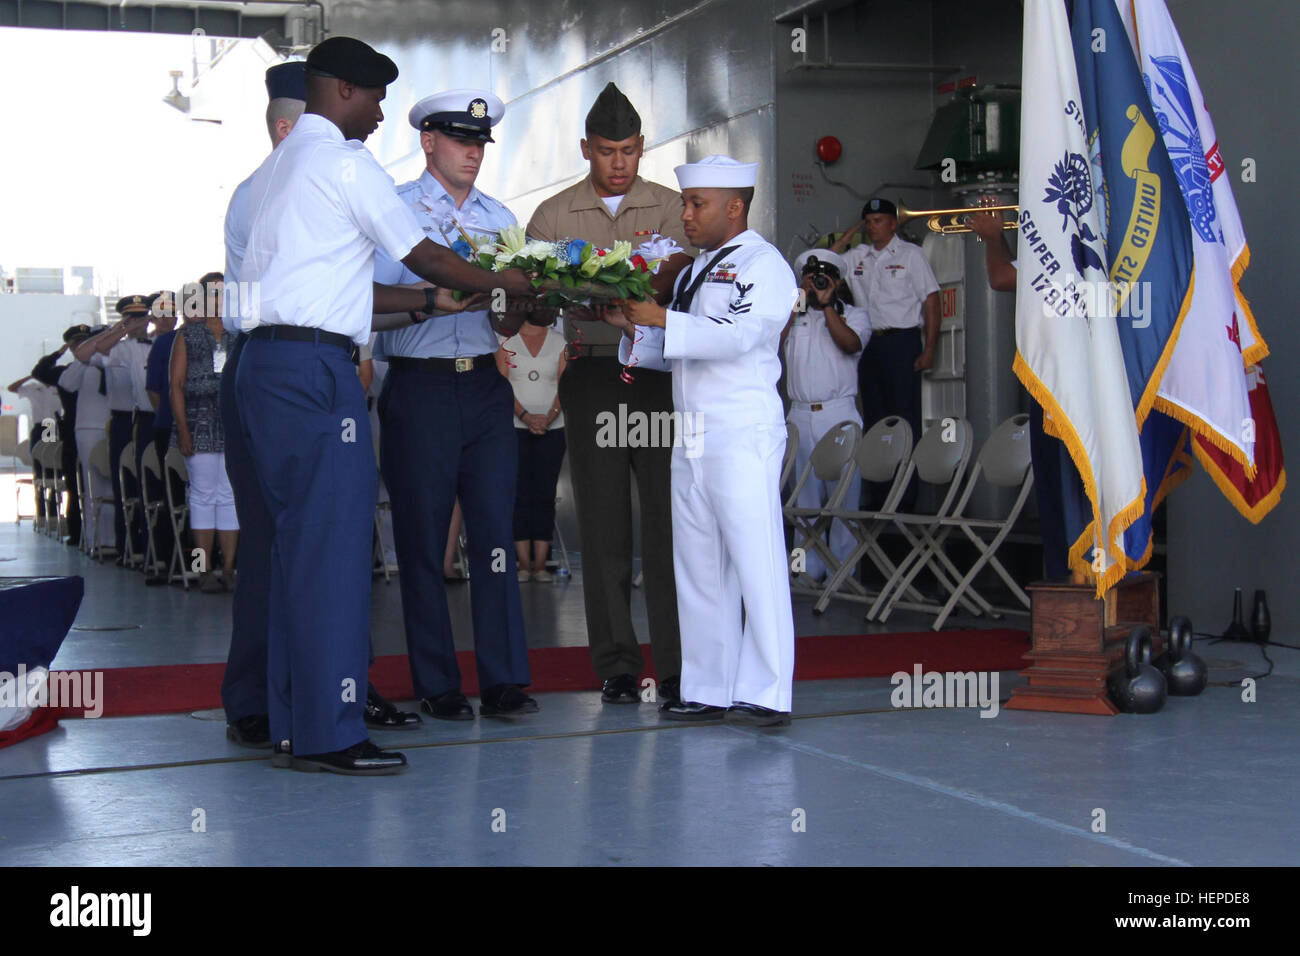 The youngest service member from each of the five U.S. military branches carried a memorial wreath down the ramp of U.S. Army Vessel Lt. Gen. William B. Bunker (Logistic Support Vessel 4) during the 71st West Loch Disaster Remembrance Ceremony to the waters of West Loch as a sign of respect and remembrance at Joint Base Pearl Harbor-Hickam, May 21, 2015. This was the second largest tragedy in Pearl Harbor during WWII. Hawaii community, service members memorialize those lost at West Loch 150521-A-AY884-142 Stock Photo